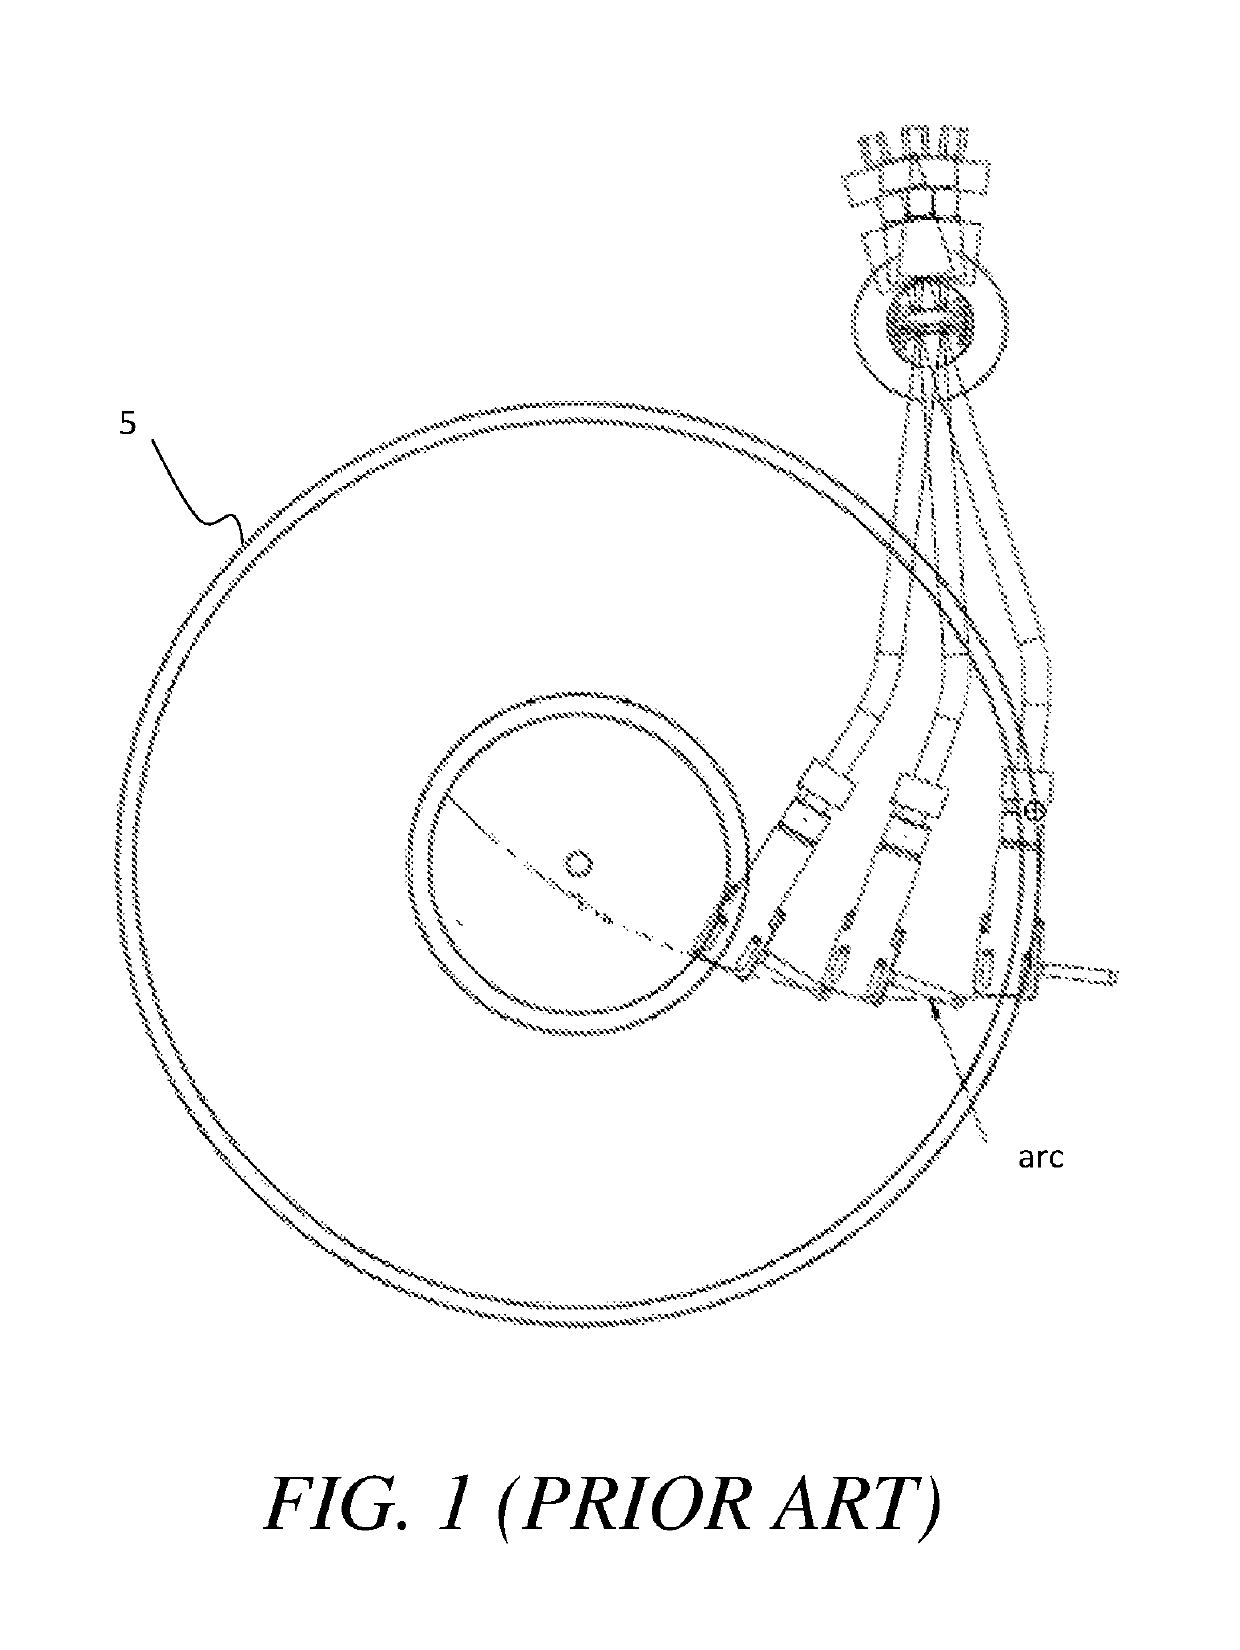 Apparatus, methods, and systems for controlling tonearm tracking for a record turntable